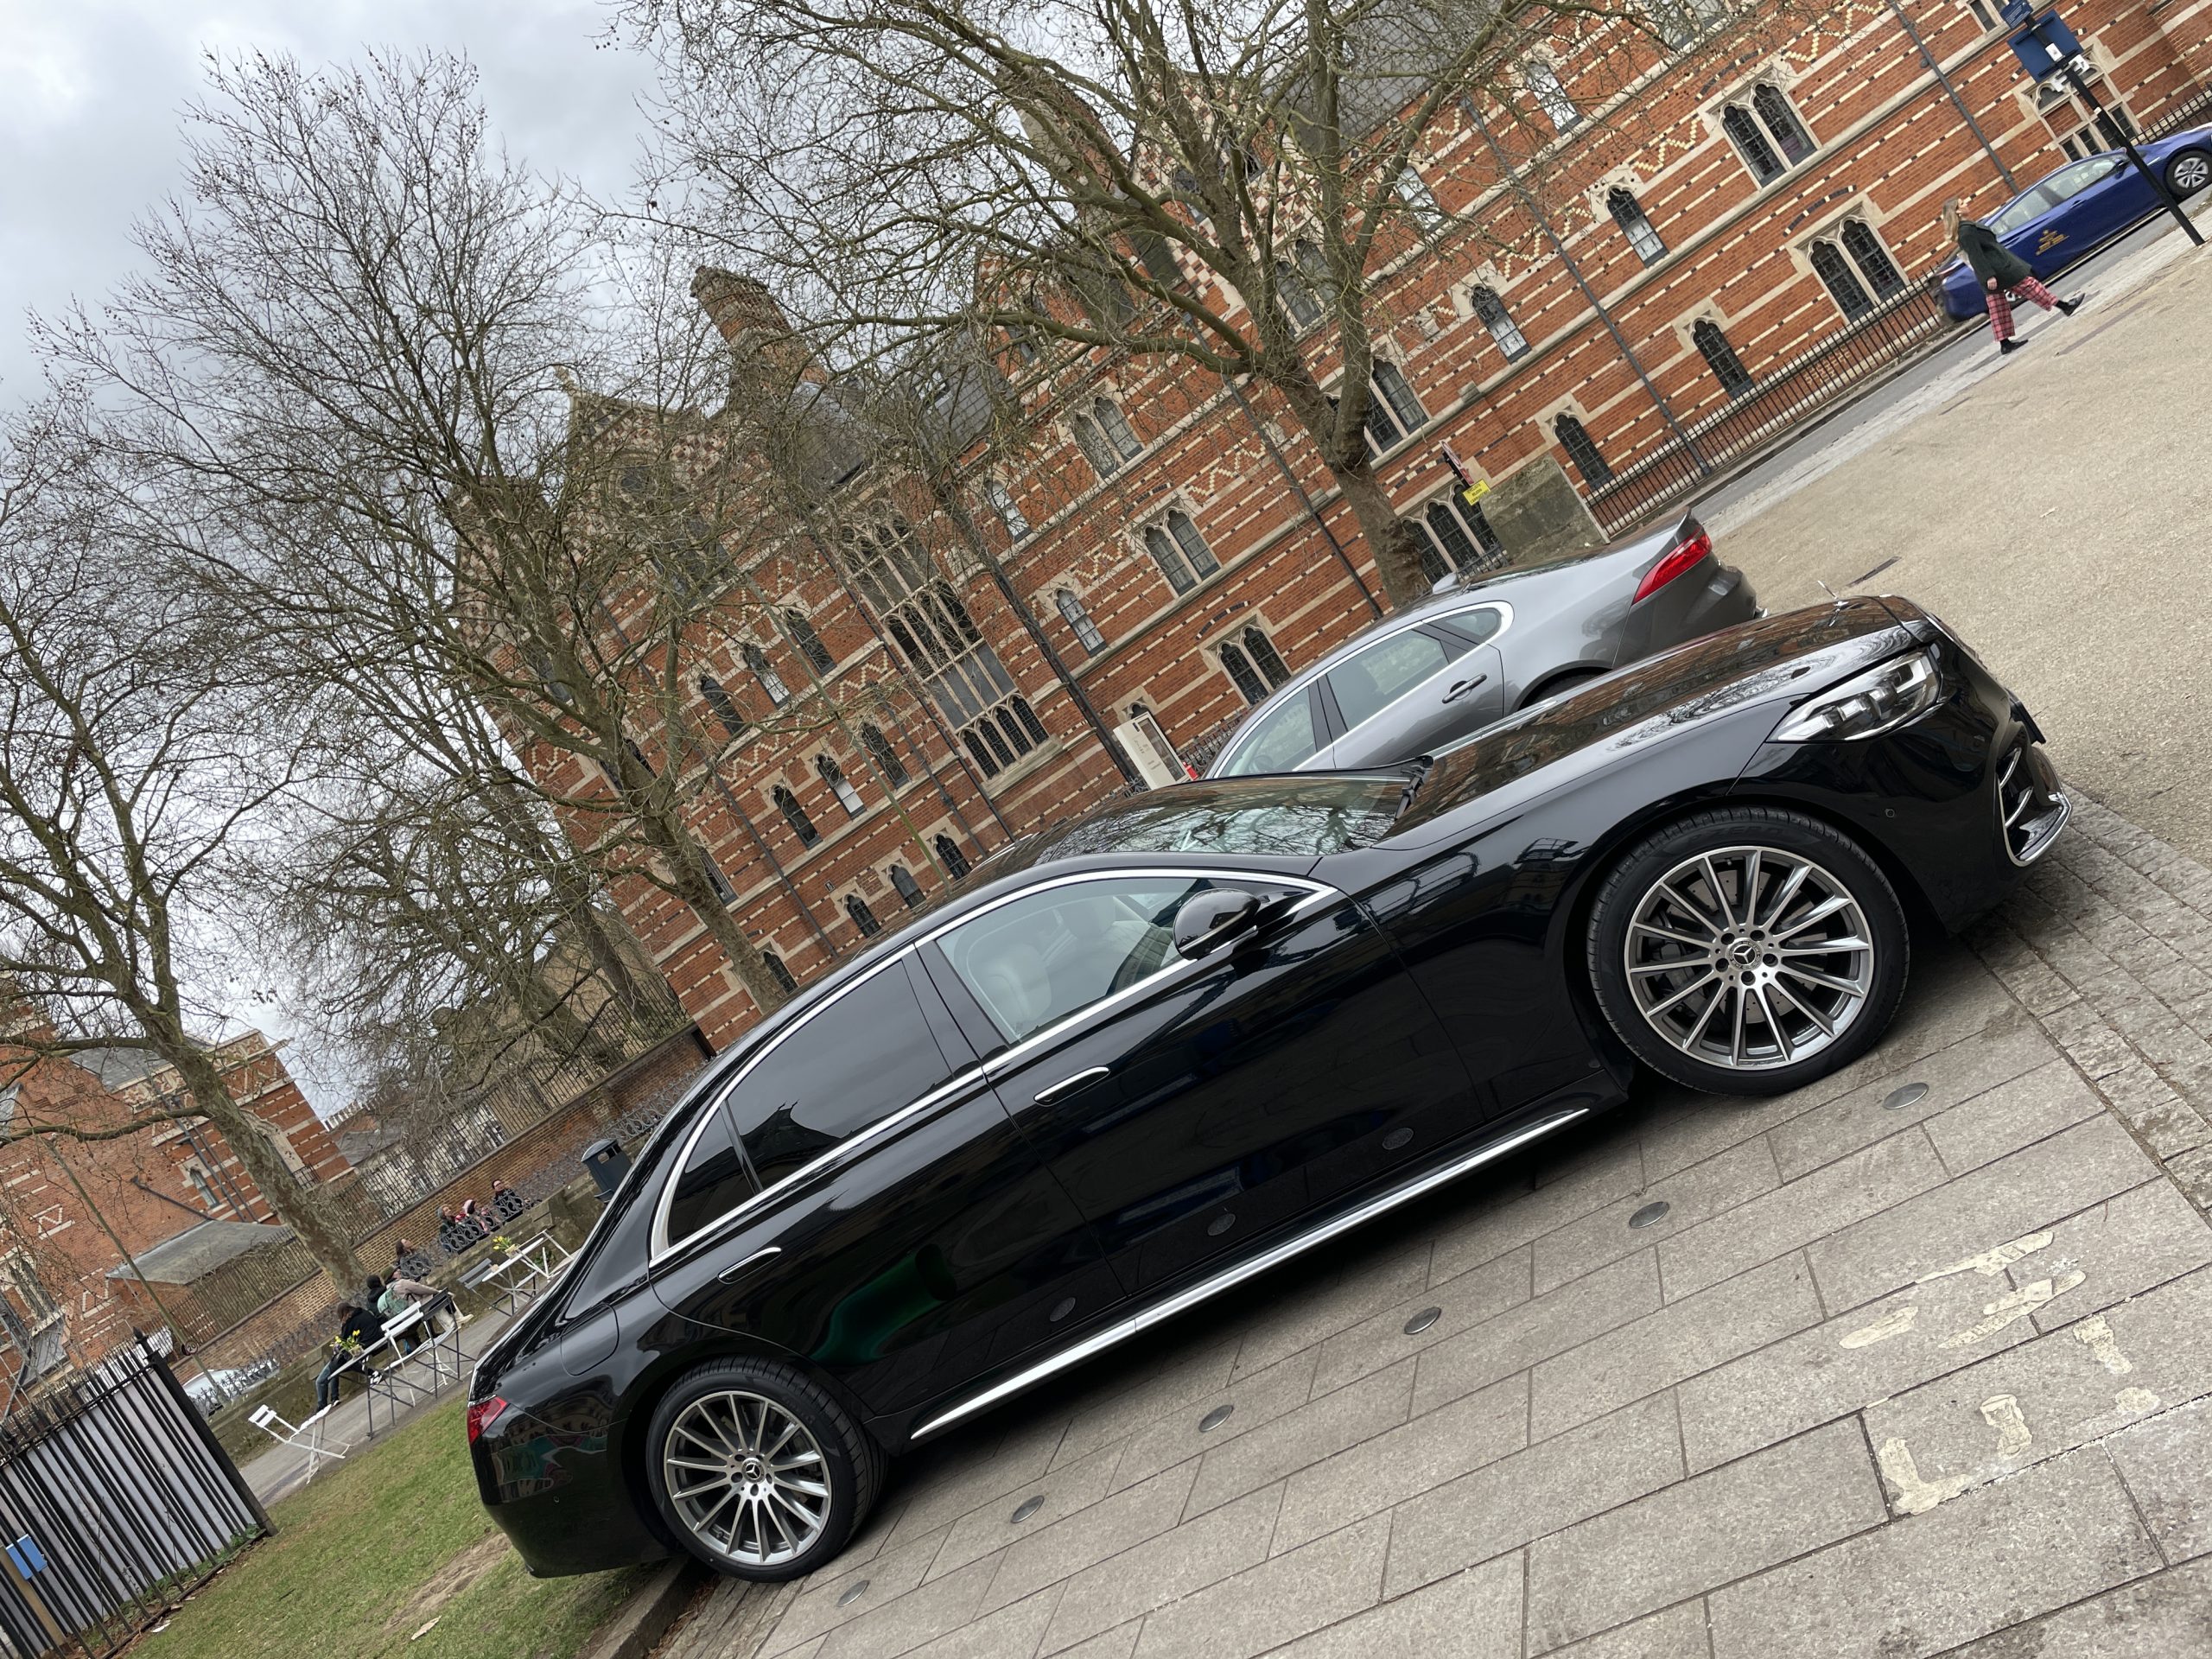 Mercedes S-Class Latest in Luxury Chauffeured Travel